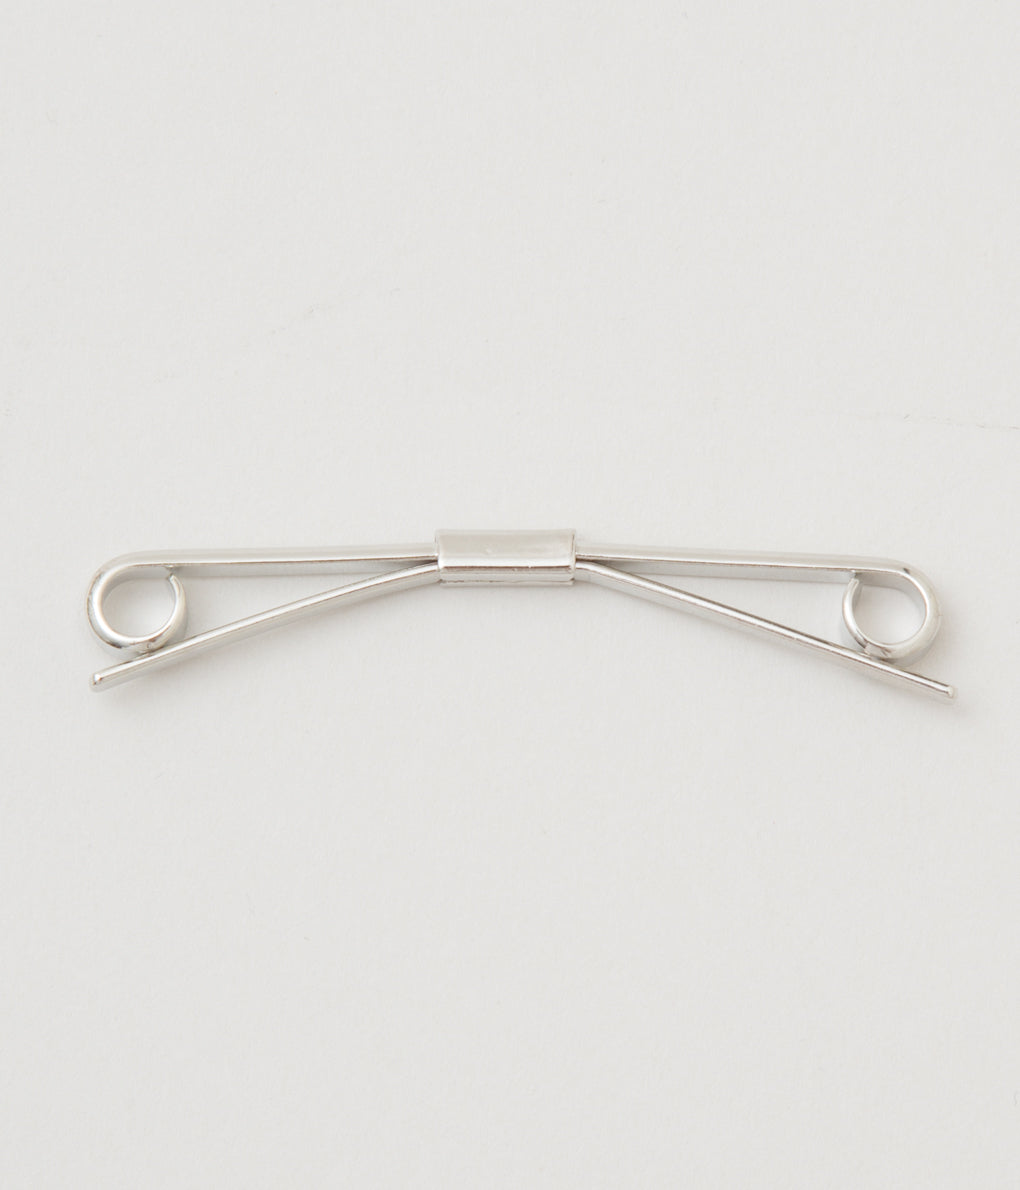 FINE AND DANDY "COLLAR BARS CURLED"(SILVER)